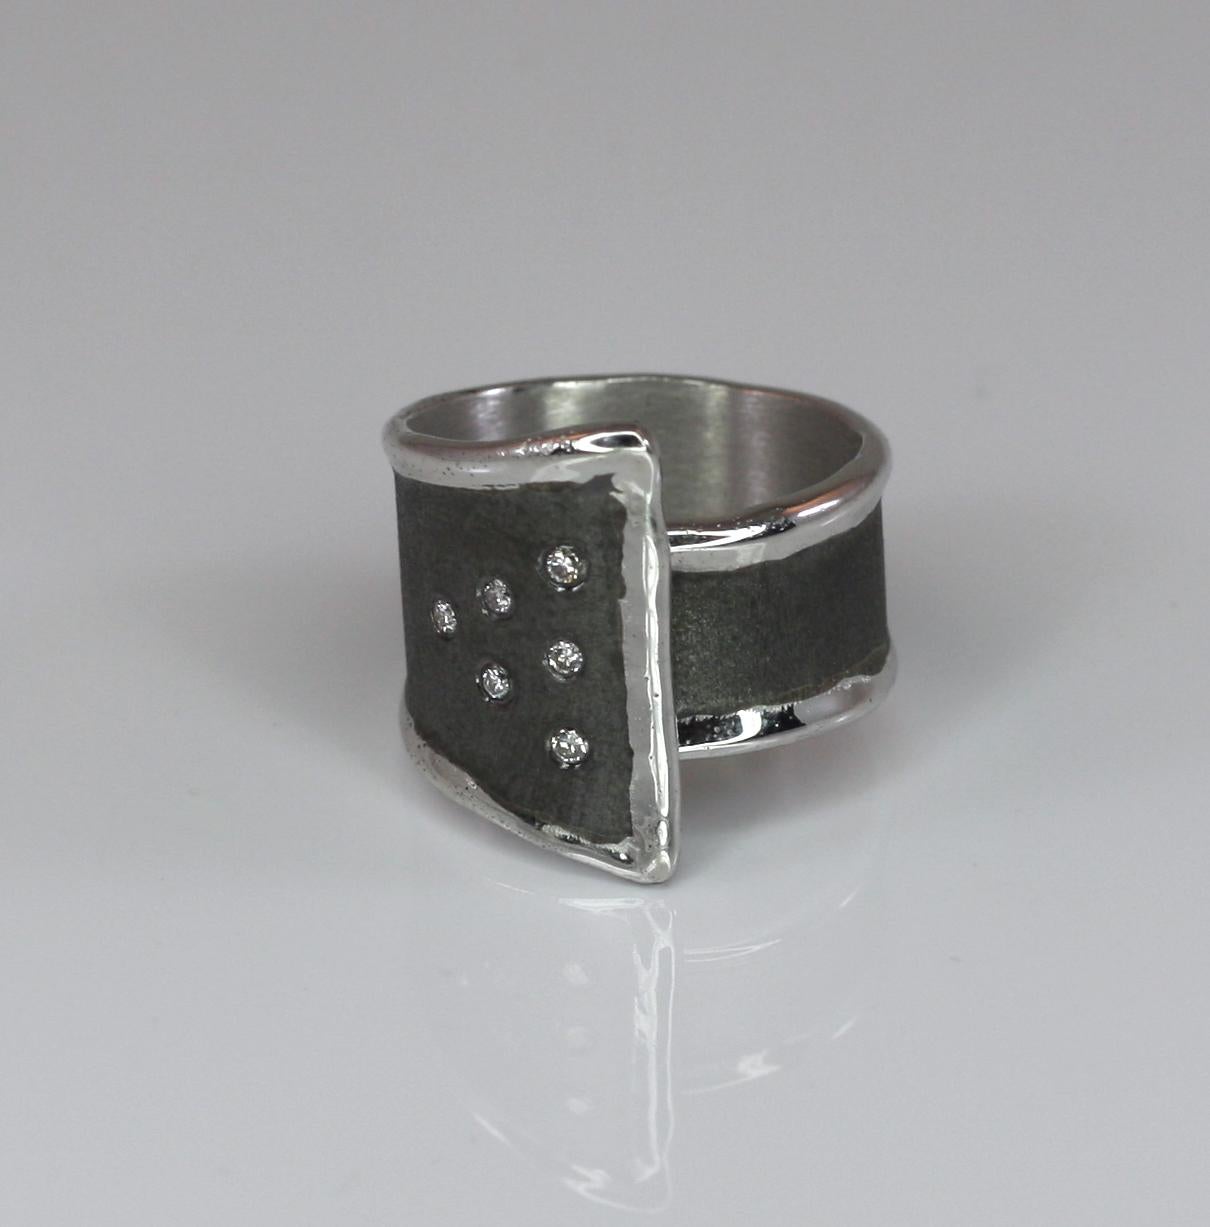 Yianni Creations 100% Handmade Artisan Ring from Fine Silver and plated with Palladium, to resist elements. This gorgeous ring features 6 brilliant-cut, a total weight of 0.18 Carat. The brushed texture has a Black Rhodium finish in contrast with